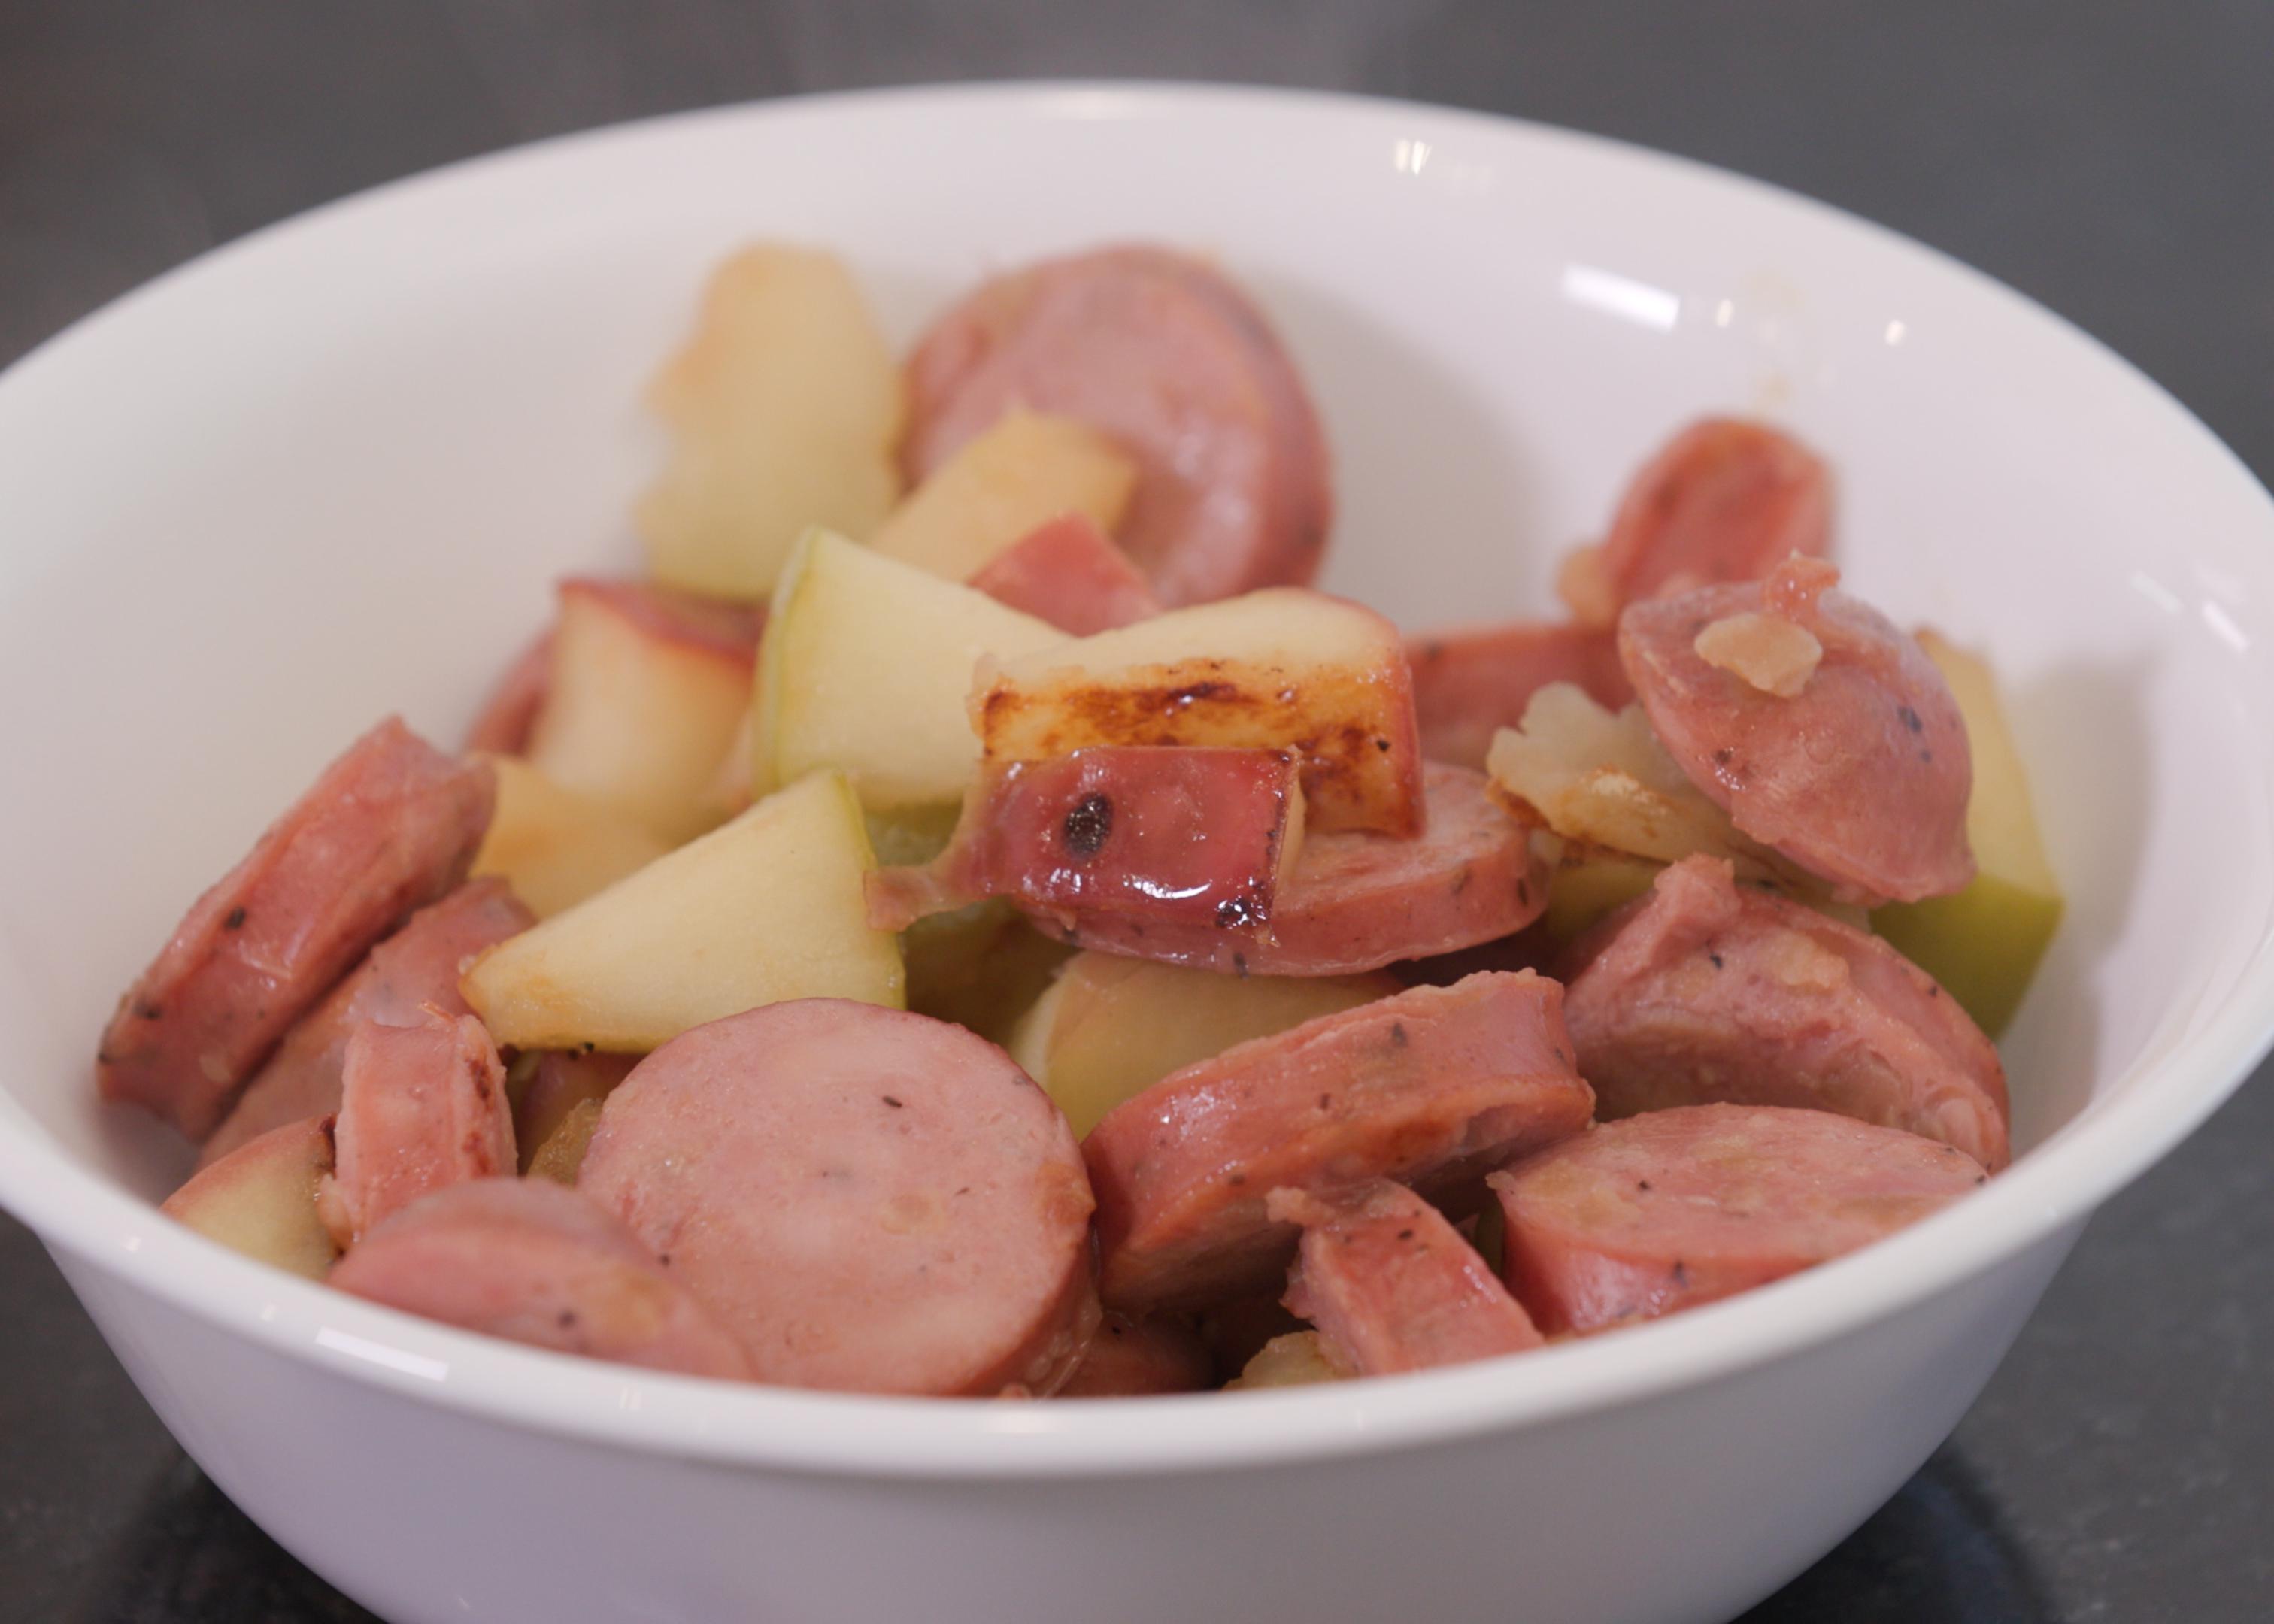 A bowl of cooked sausage and apples.